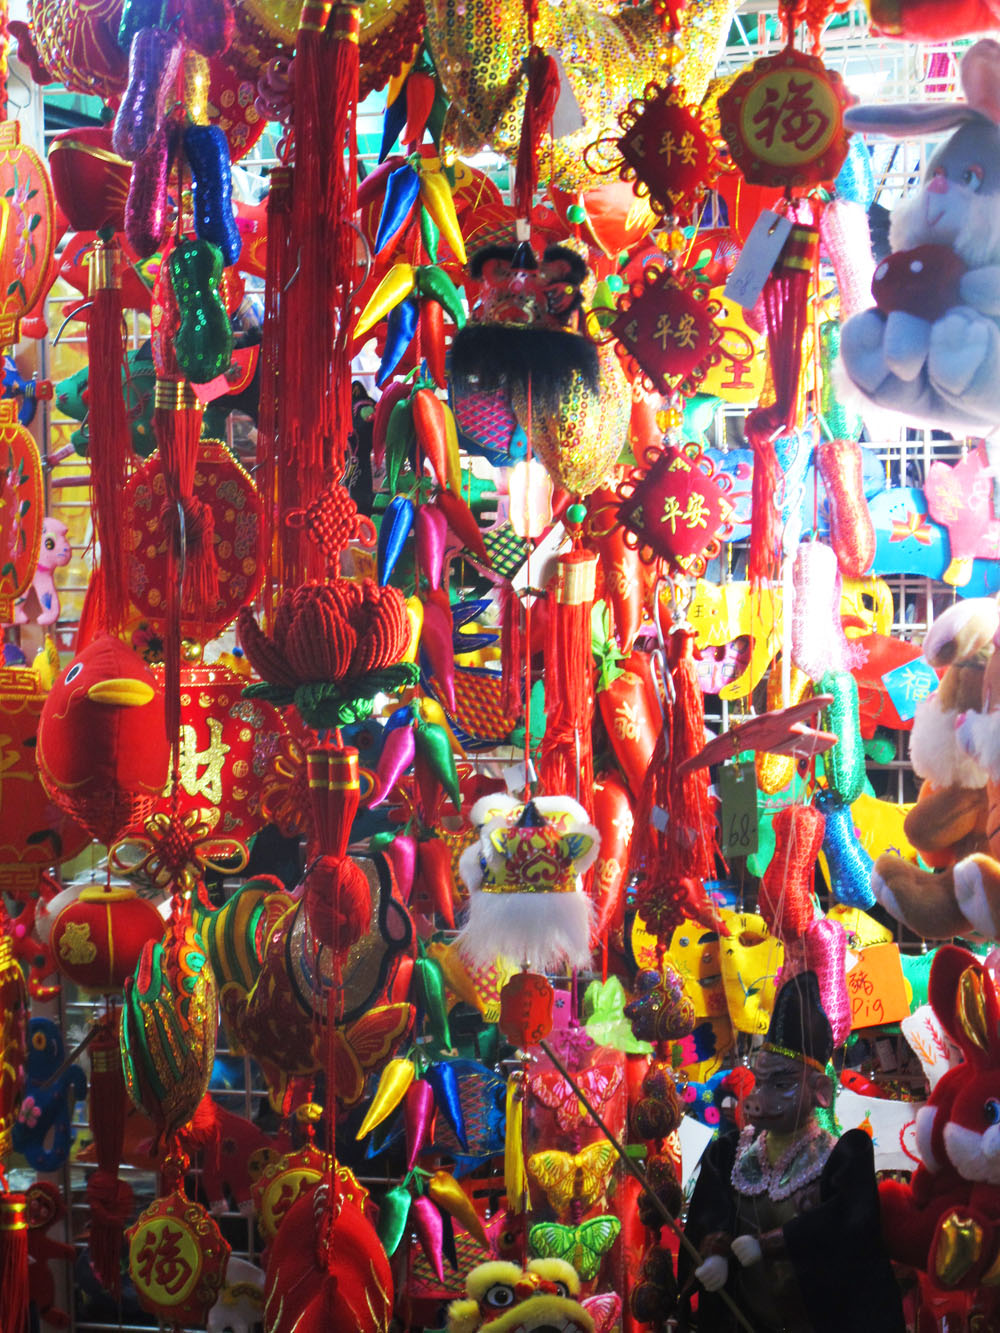 Decorations for Sale in Hong Kong China